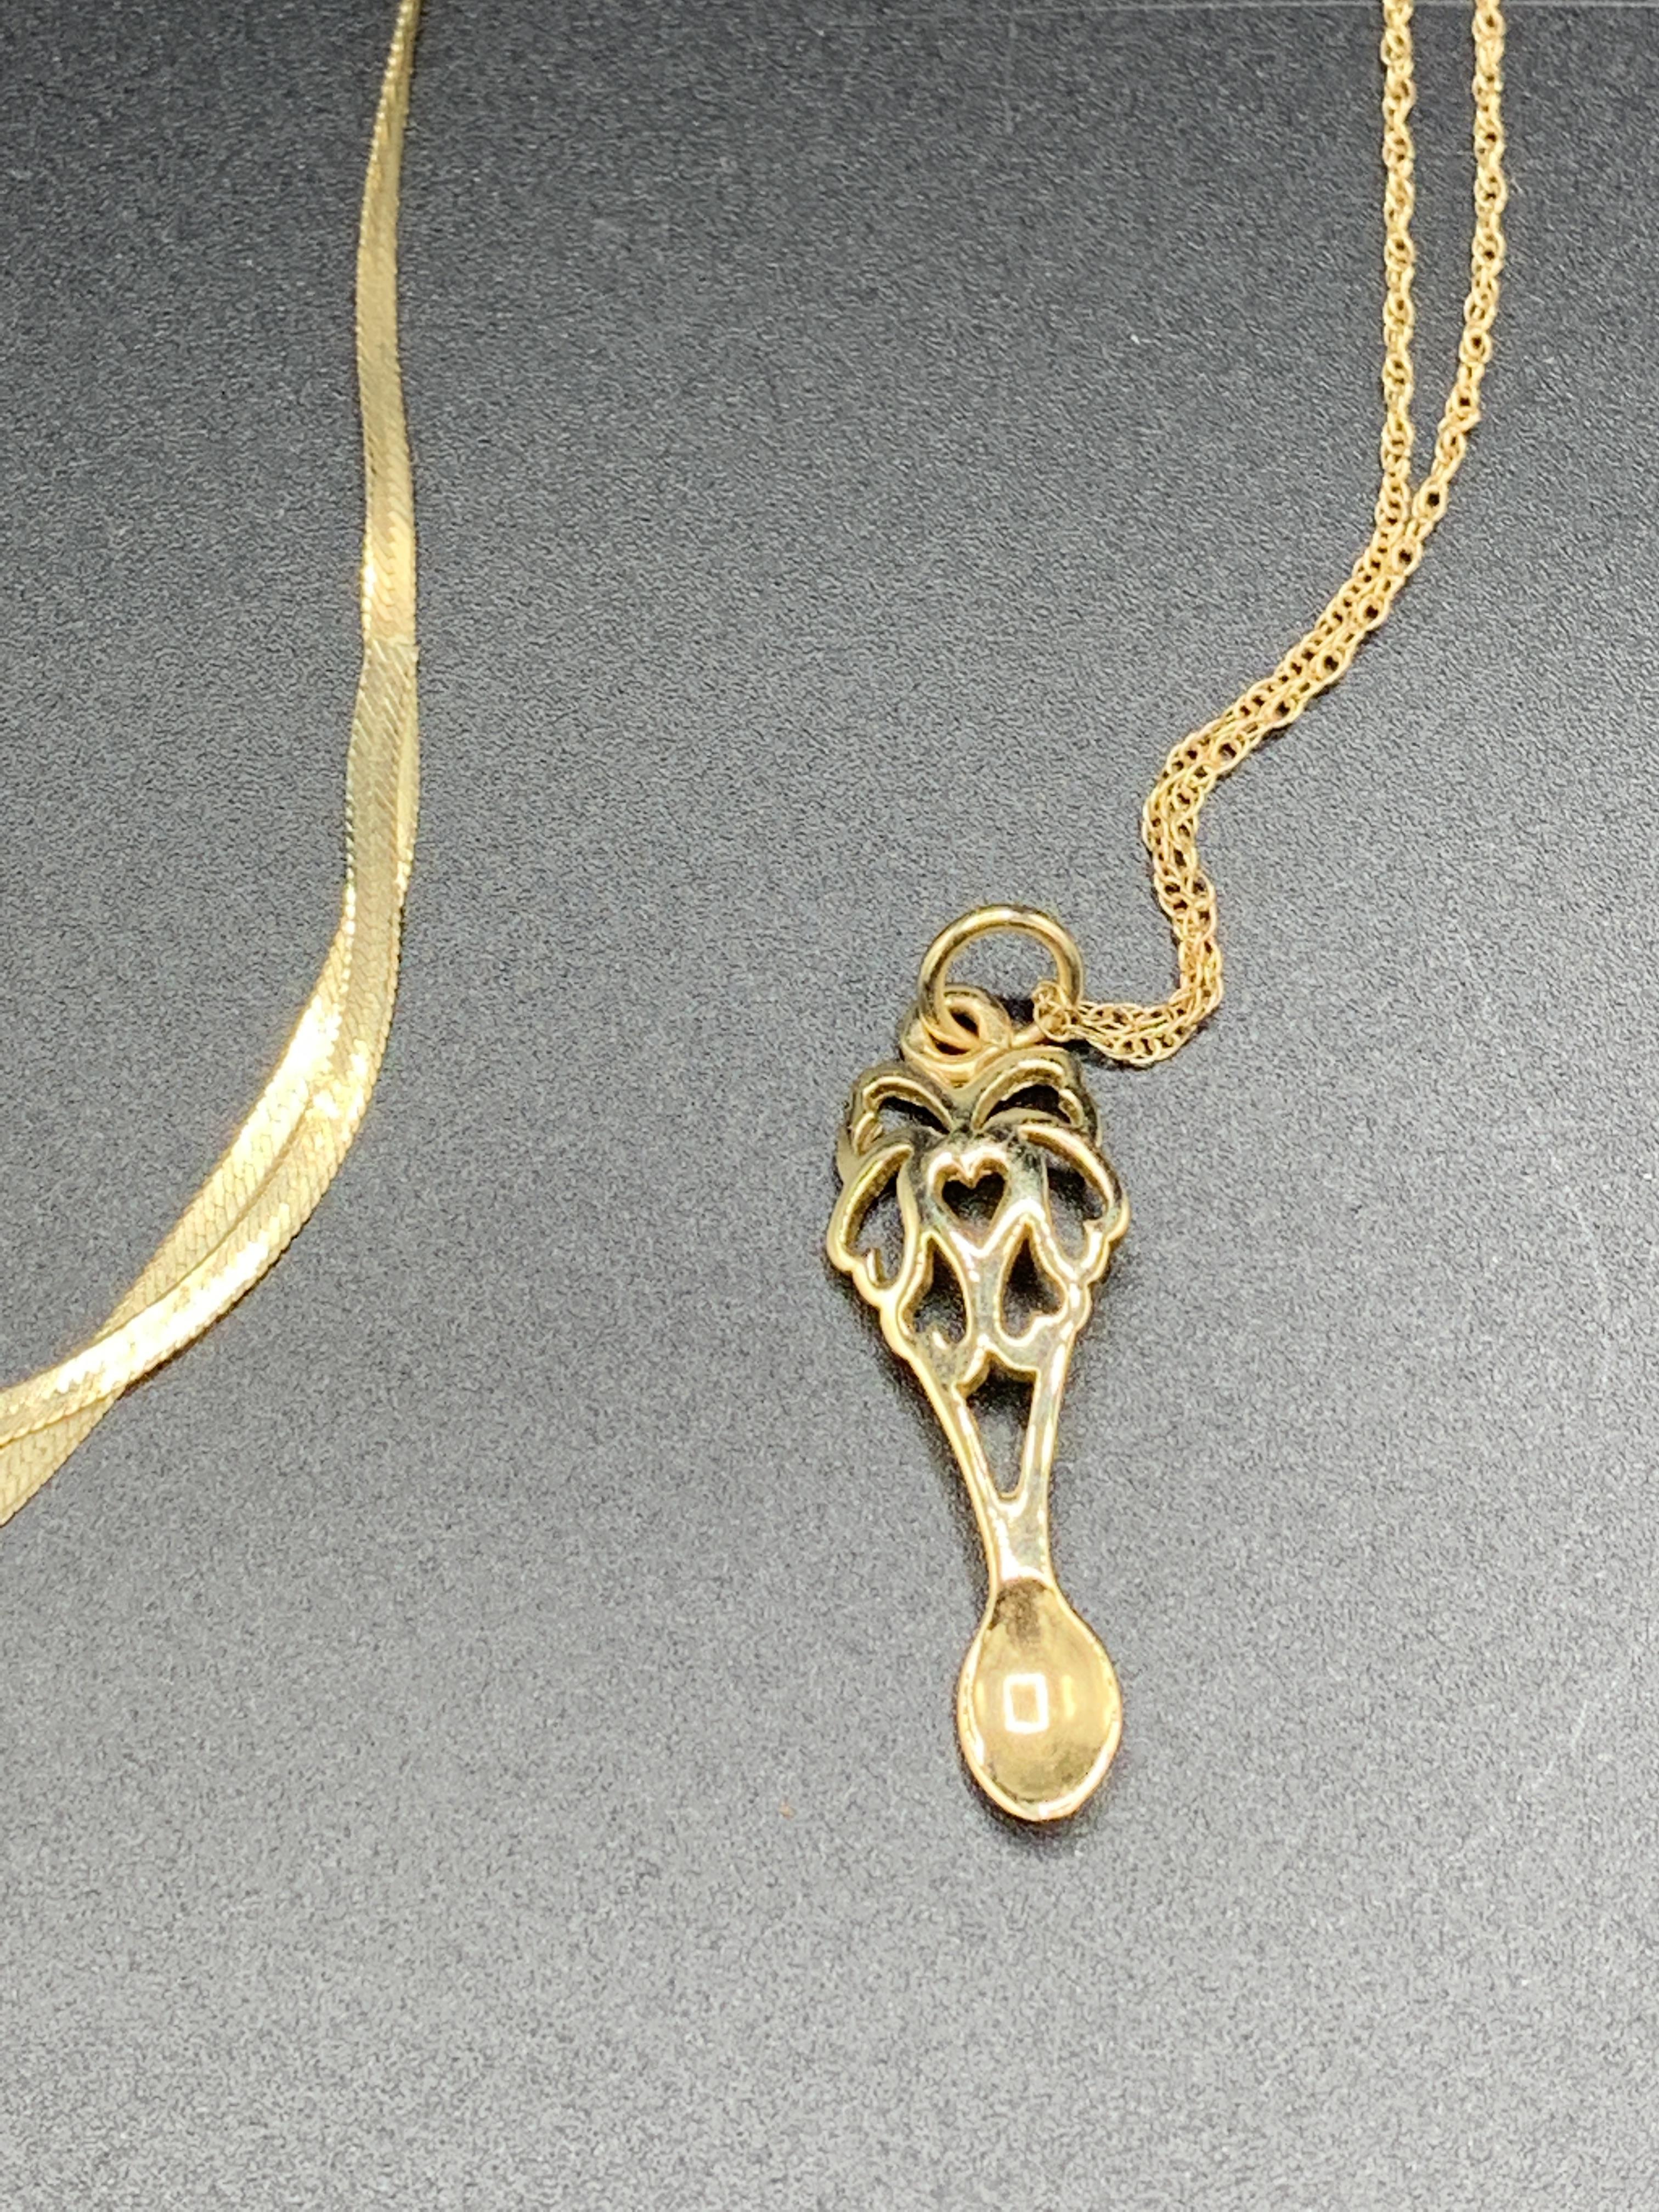 Three 9ct gold necklaces - Image 2 of 5